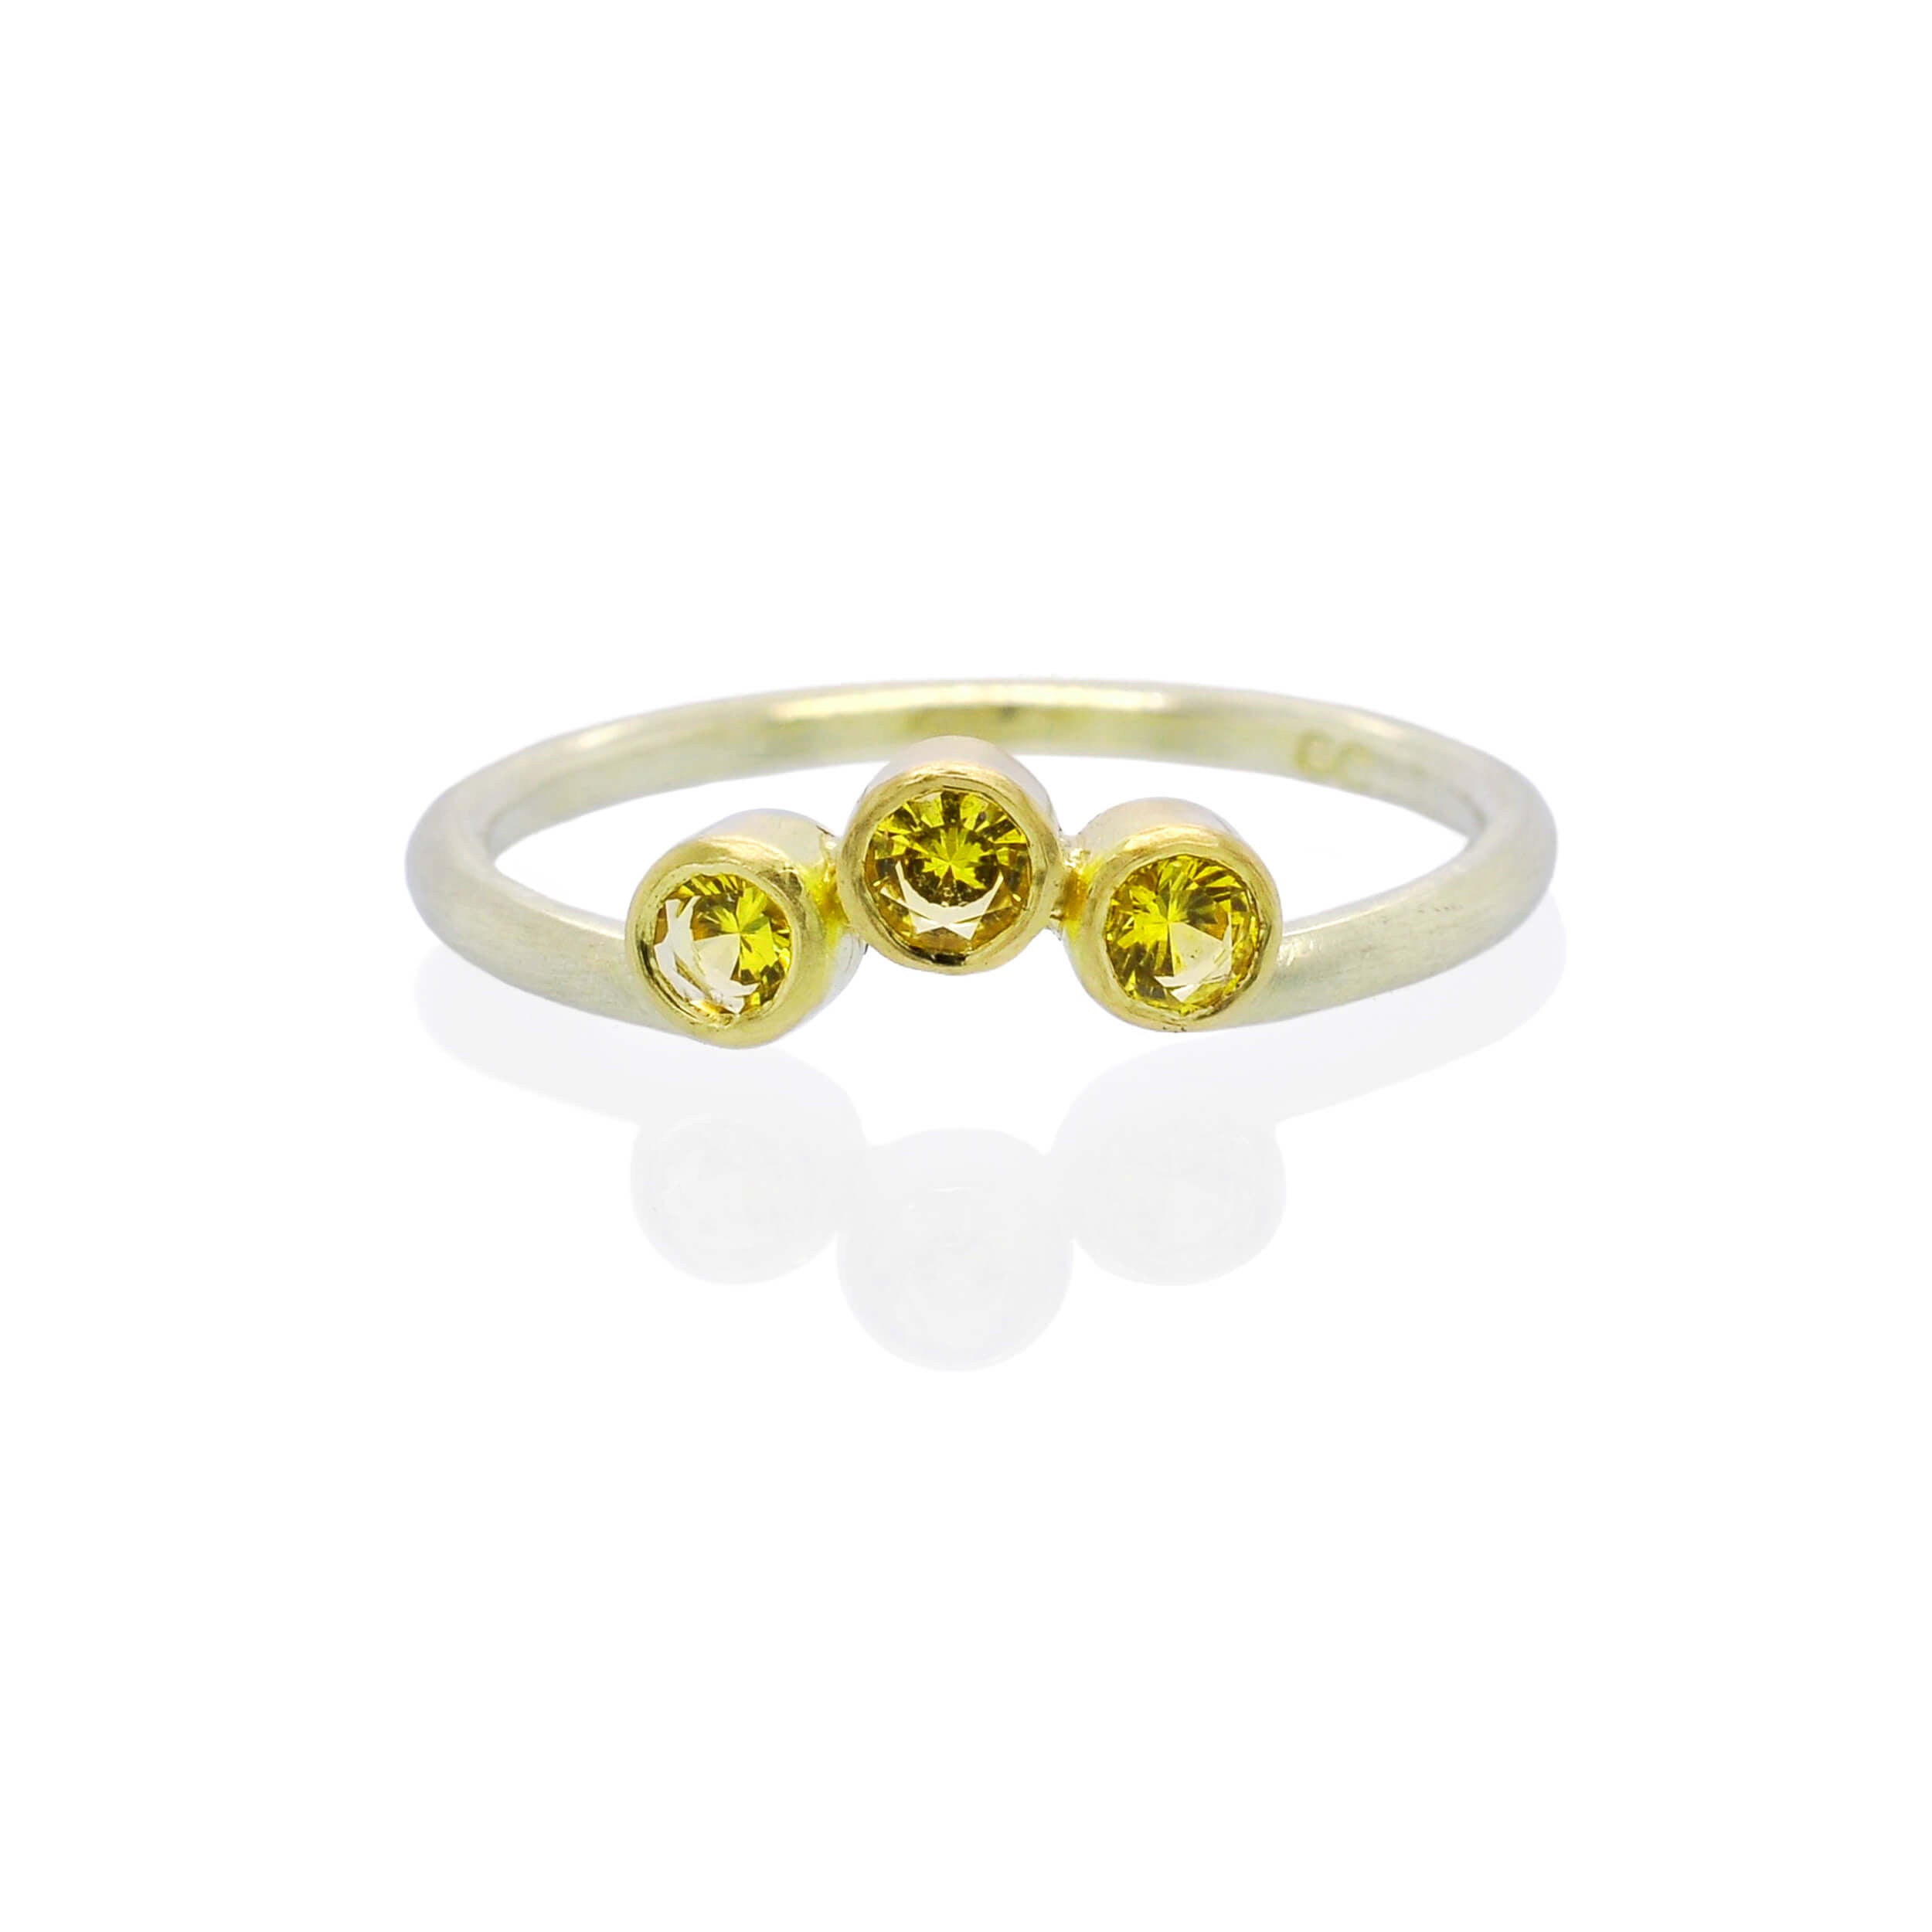 Candere by Kalyan Jewellers Allura 18K YG I2GH Size 5 18kt Diamond Yellow Gold  ring Price in India - Buy Candere by Kalyan Jewellers Allura 18K YG I2GH  Size 5 18kt Diamond